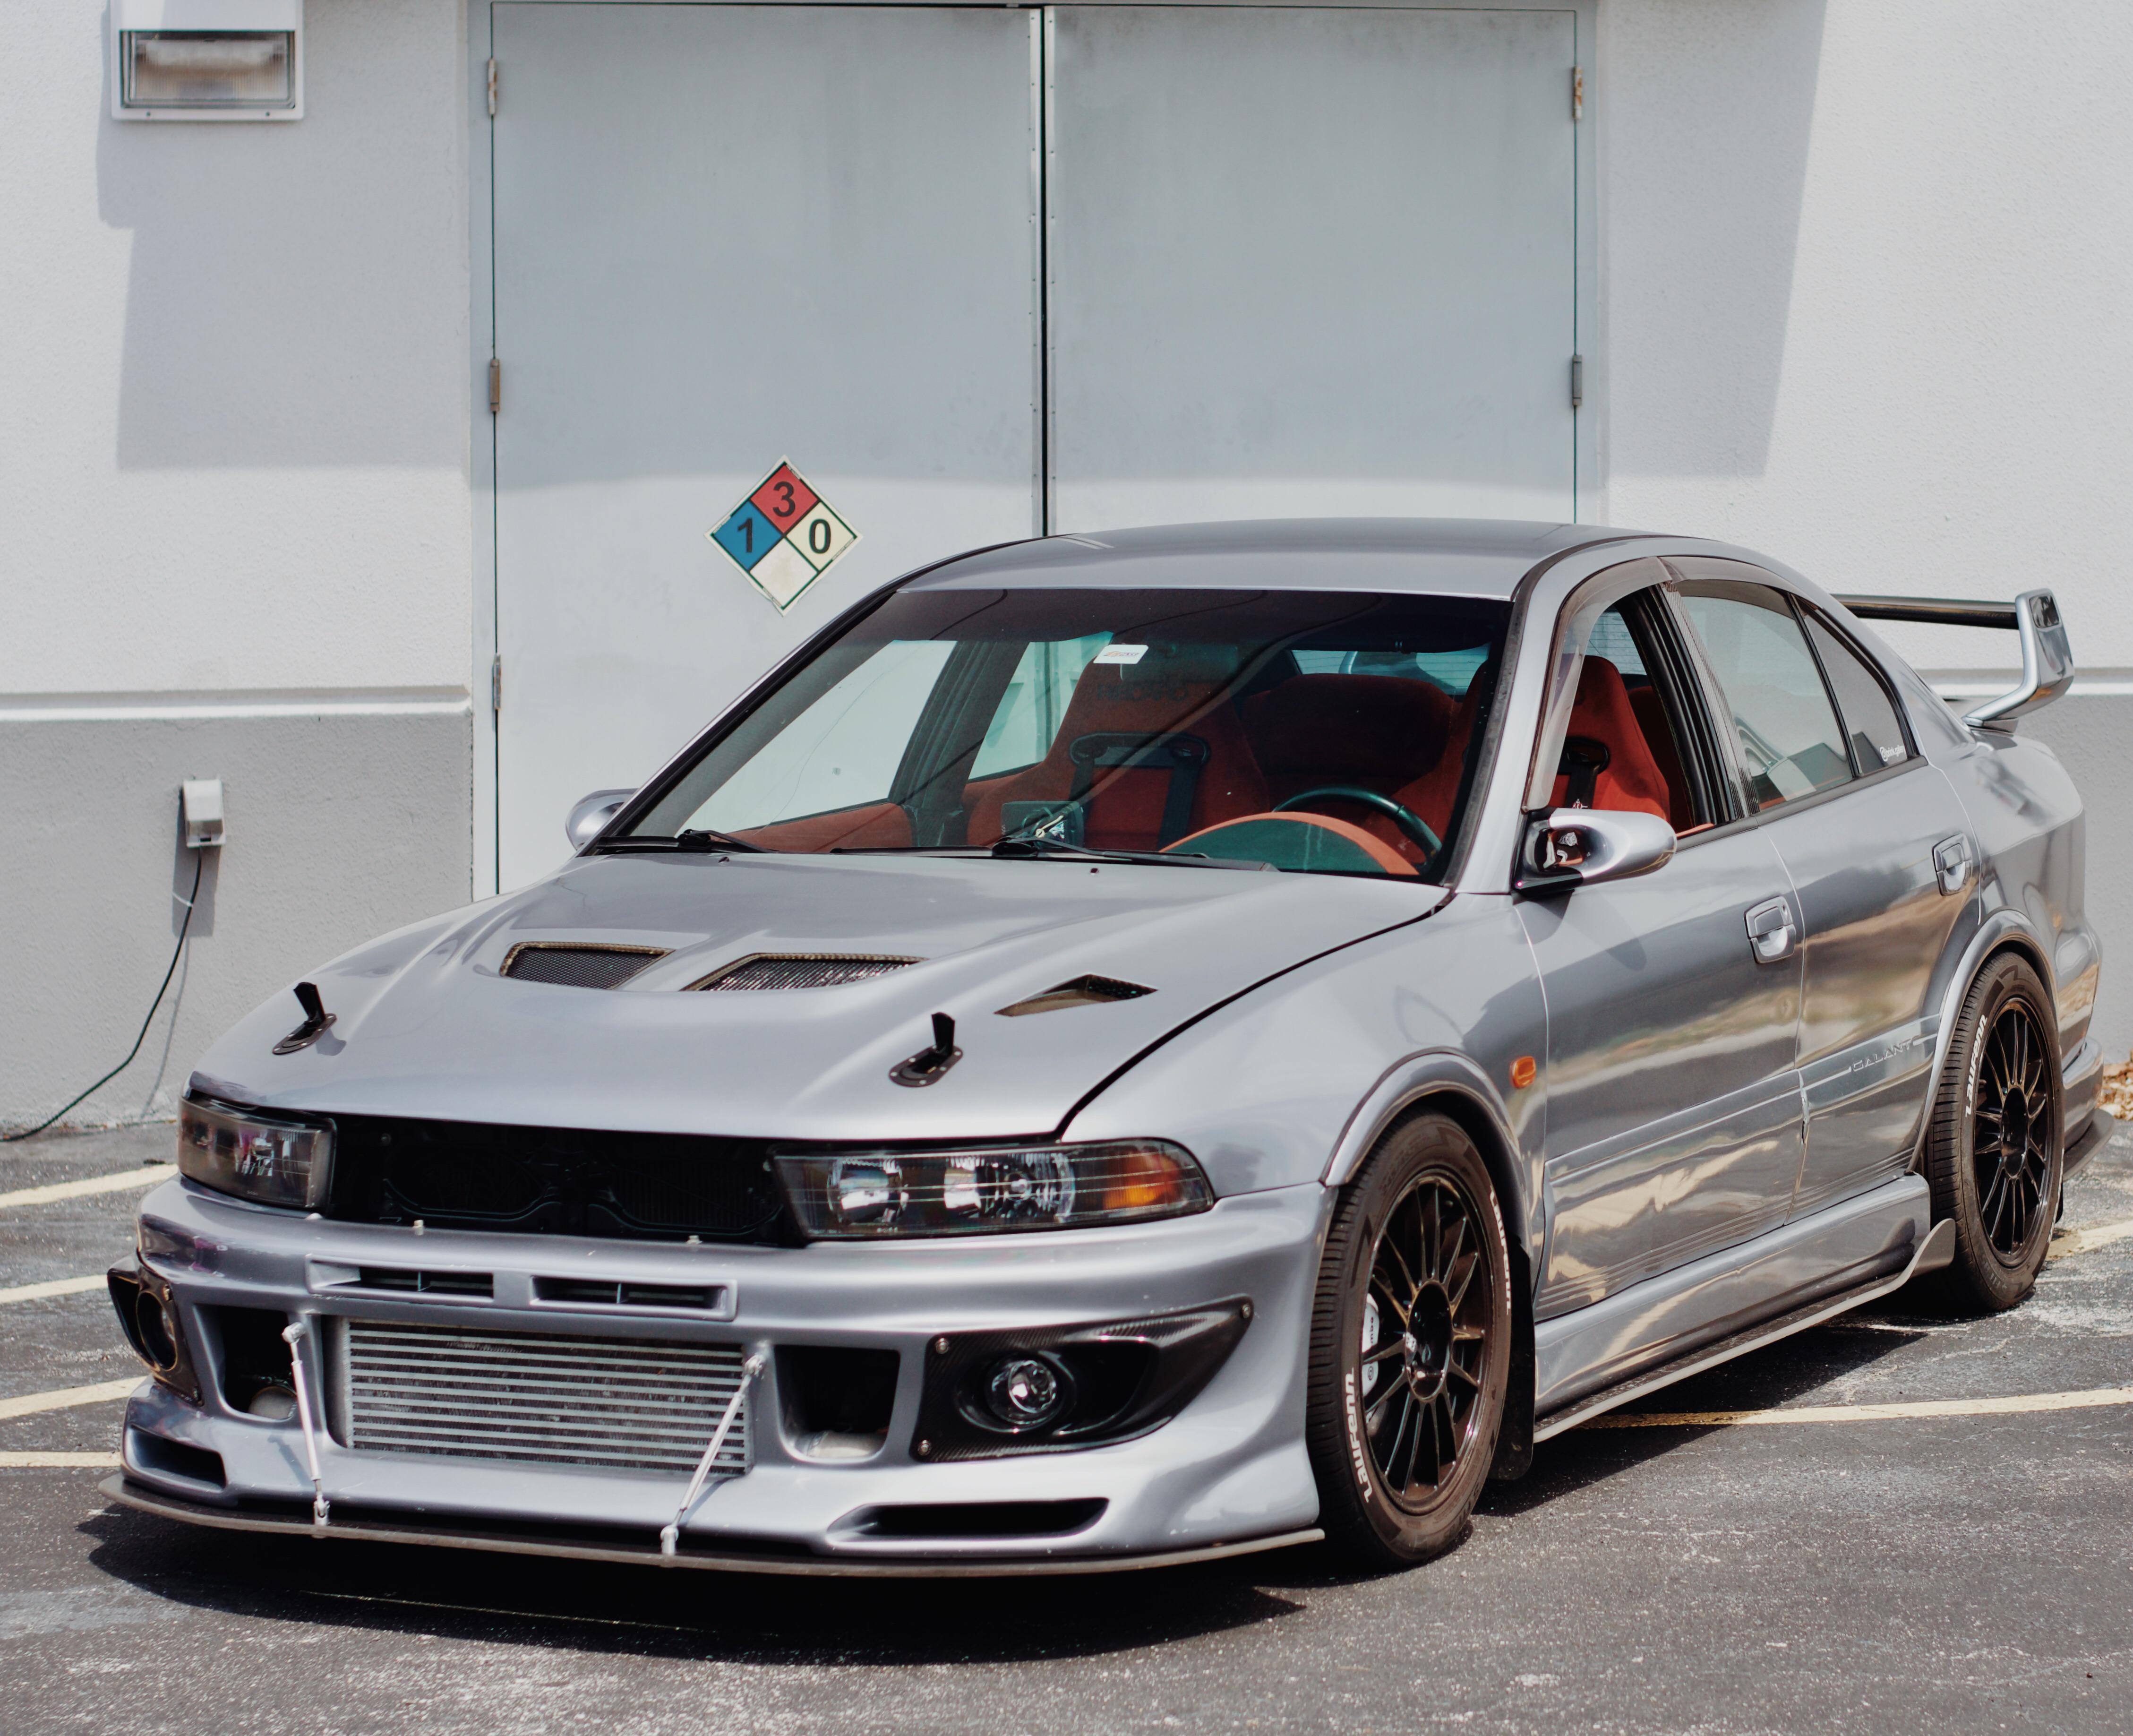 What a great looking Mitsubishi Galant! : r/AwesomeCarMods